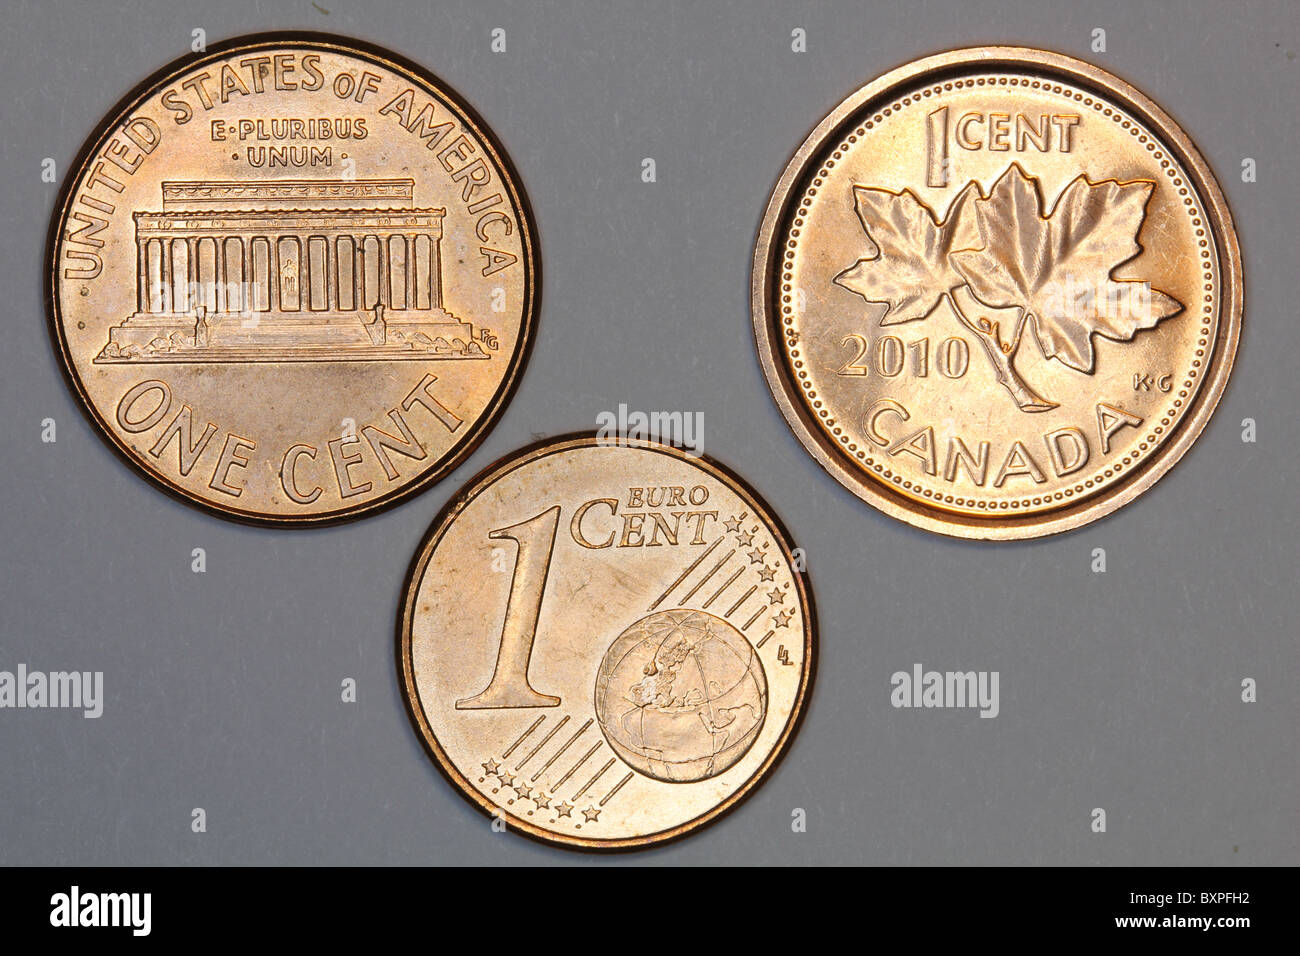 https://c8.alamy.com/comp/BXPFH2/small-change-one-cent-coins-from-three-countries-BXPFH2.jpg